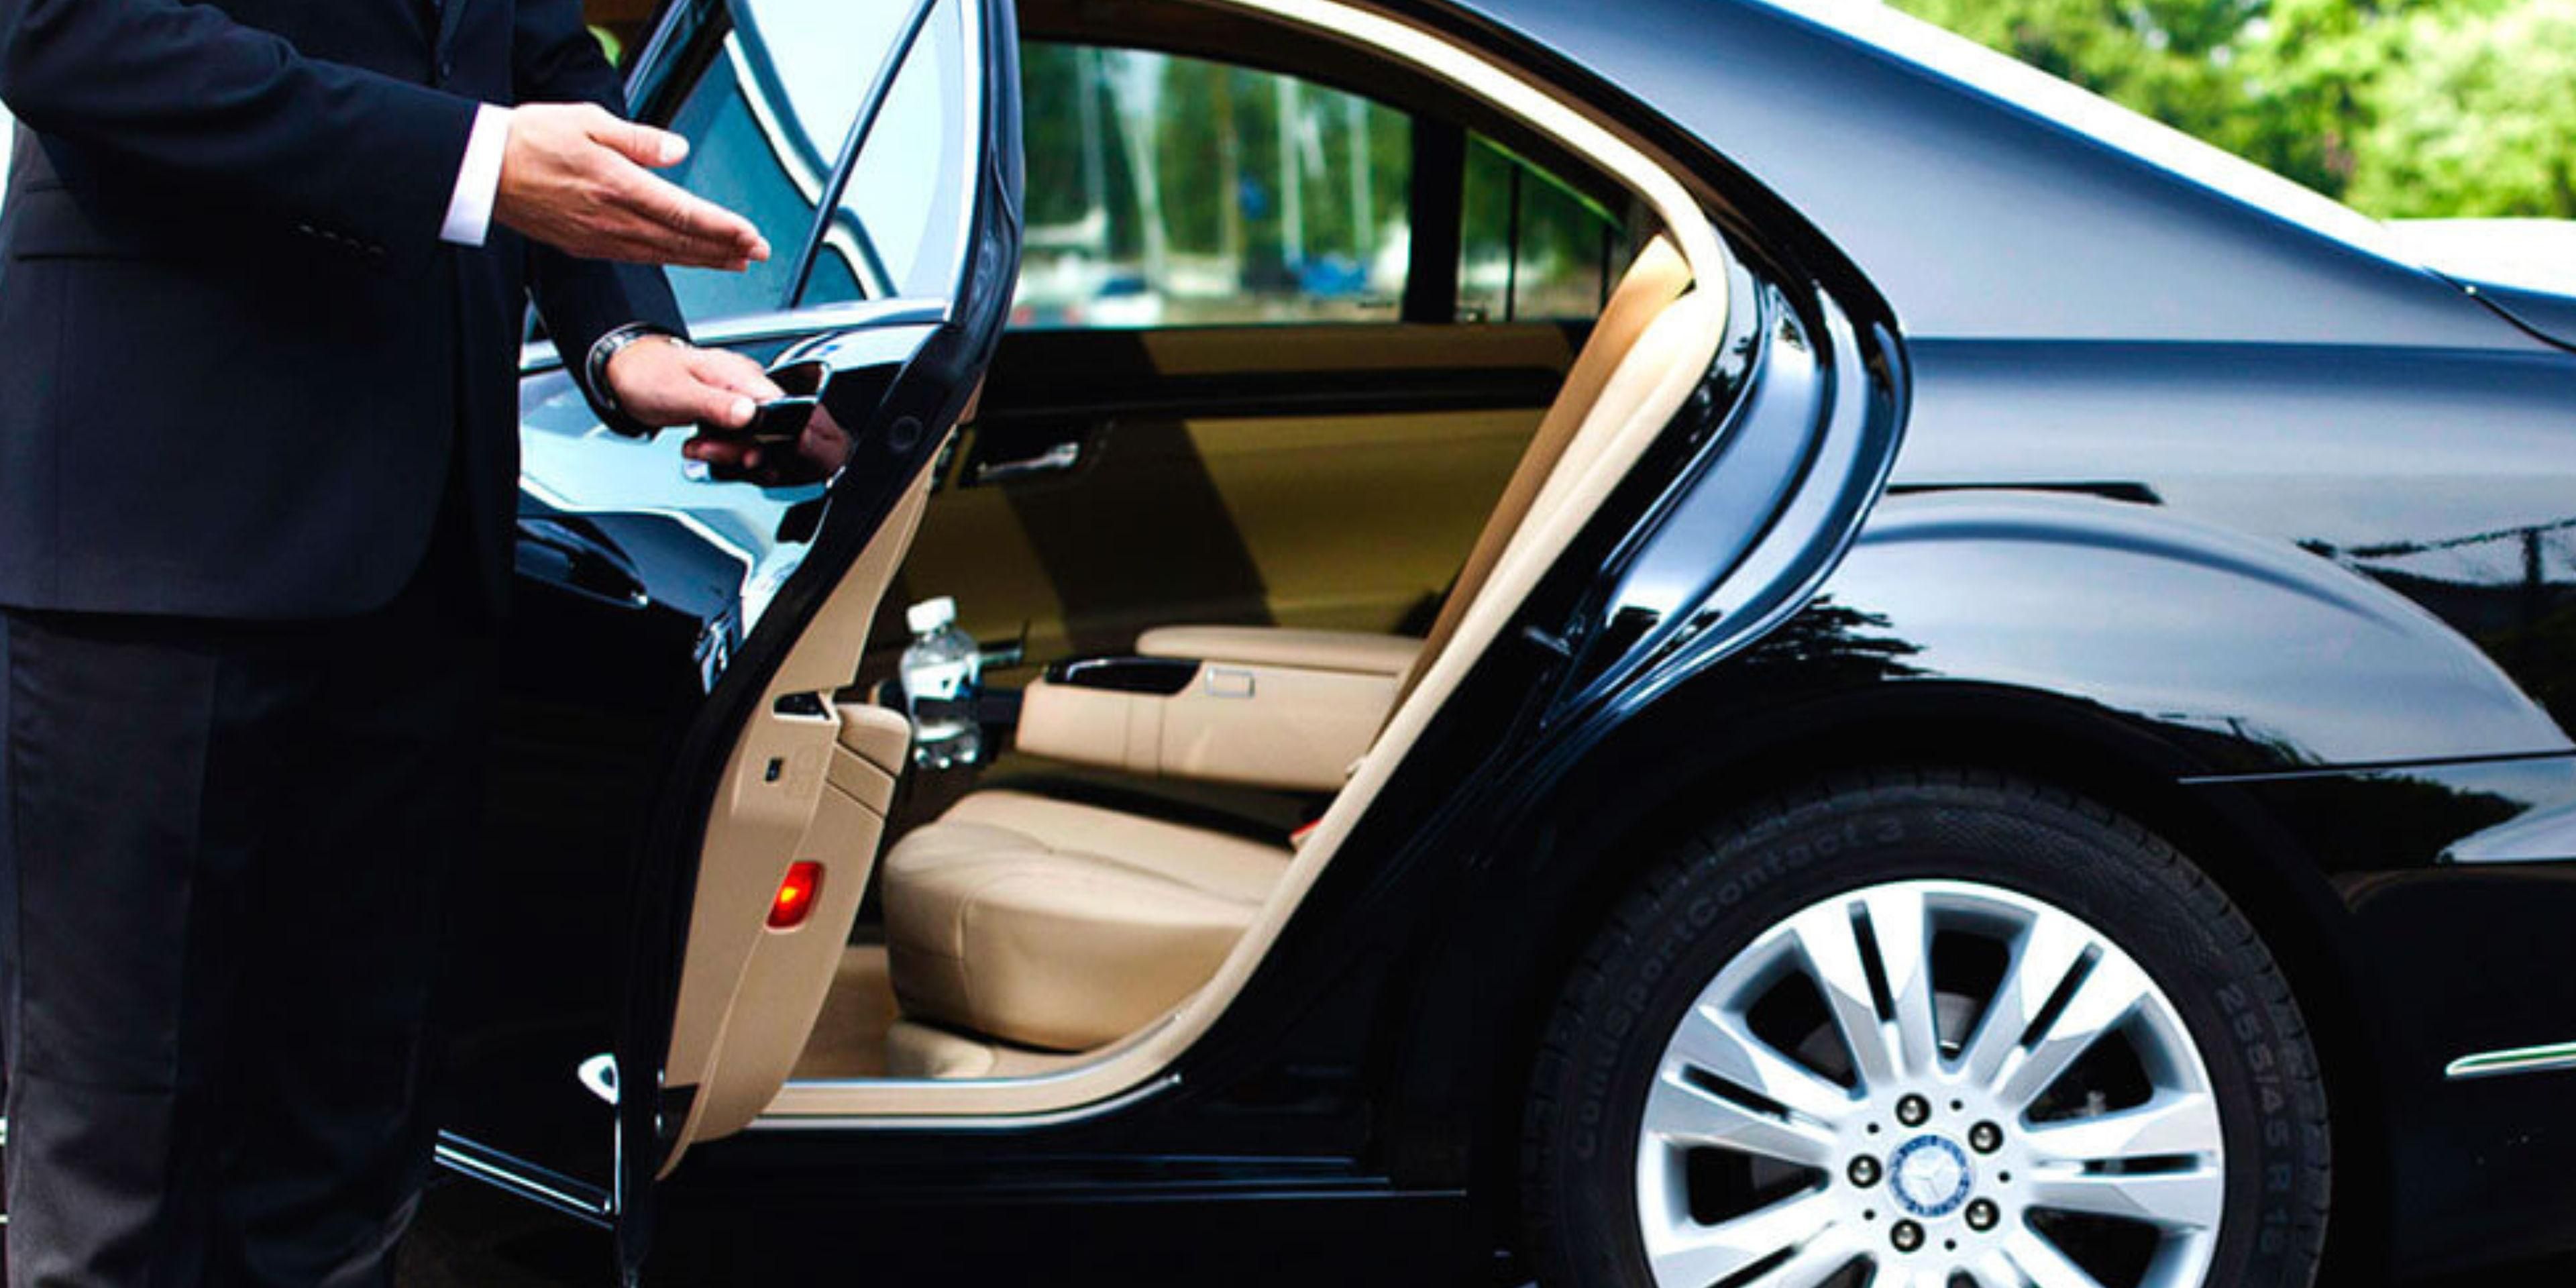 InterContinental Barcelona offers a wide range of luxurious transportation service with a professional chauffeur for you to explore the area. 
Airport-Hotel-Airport service is available through our Concierge team, starting at 85 euros per service.